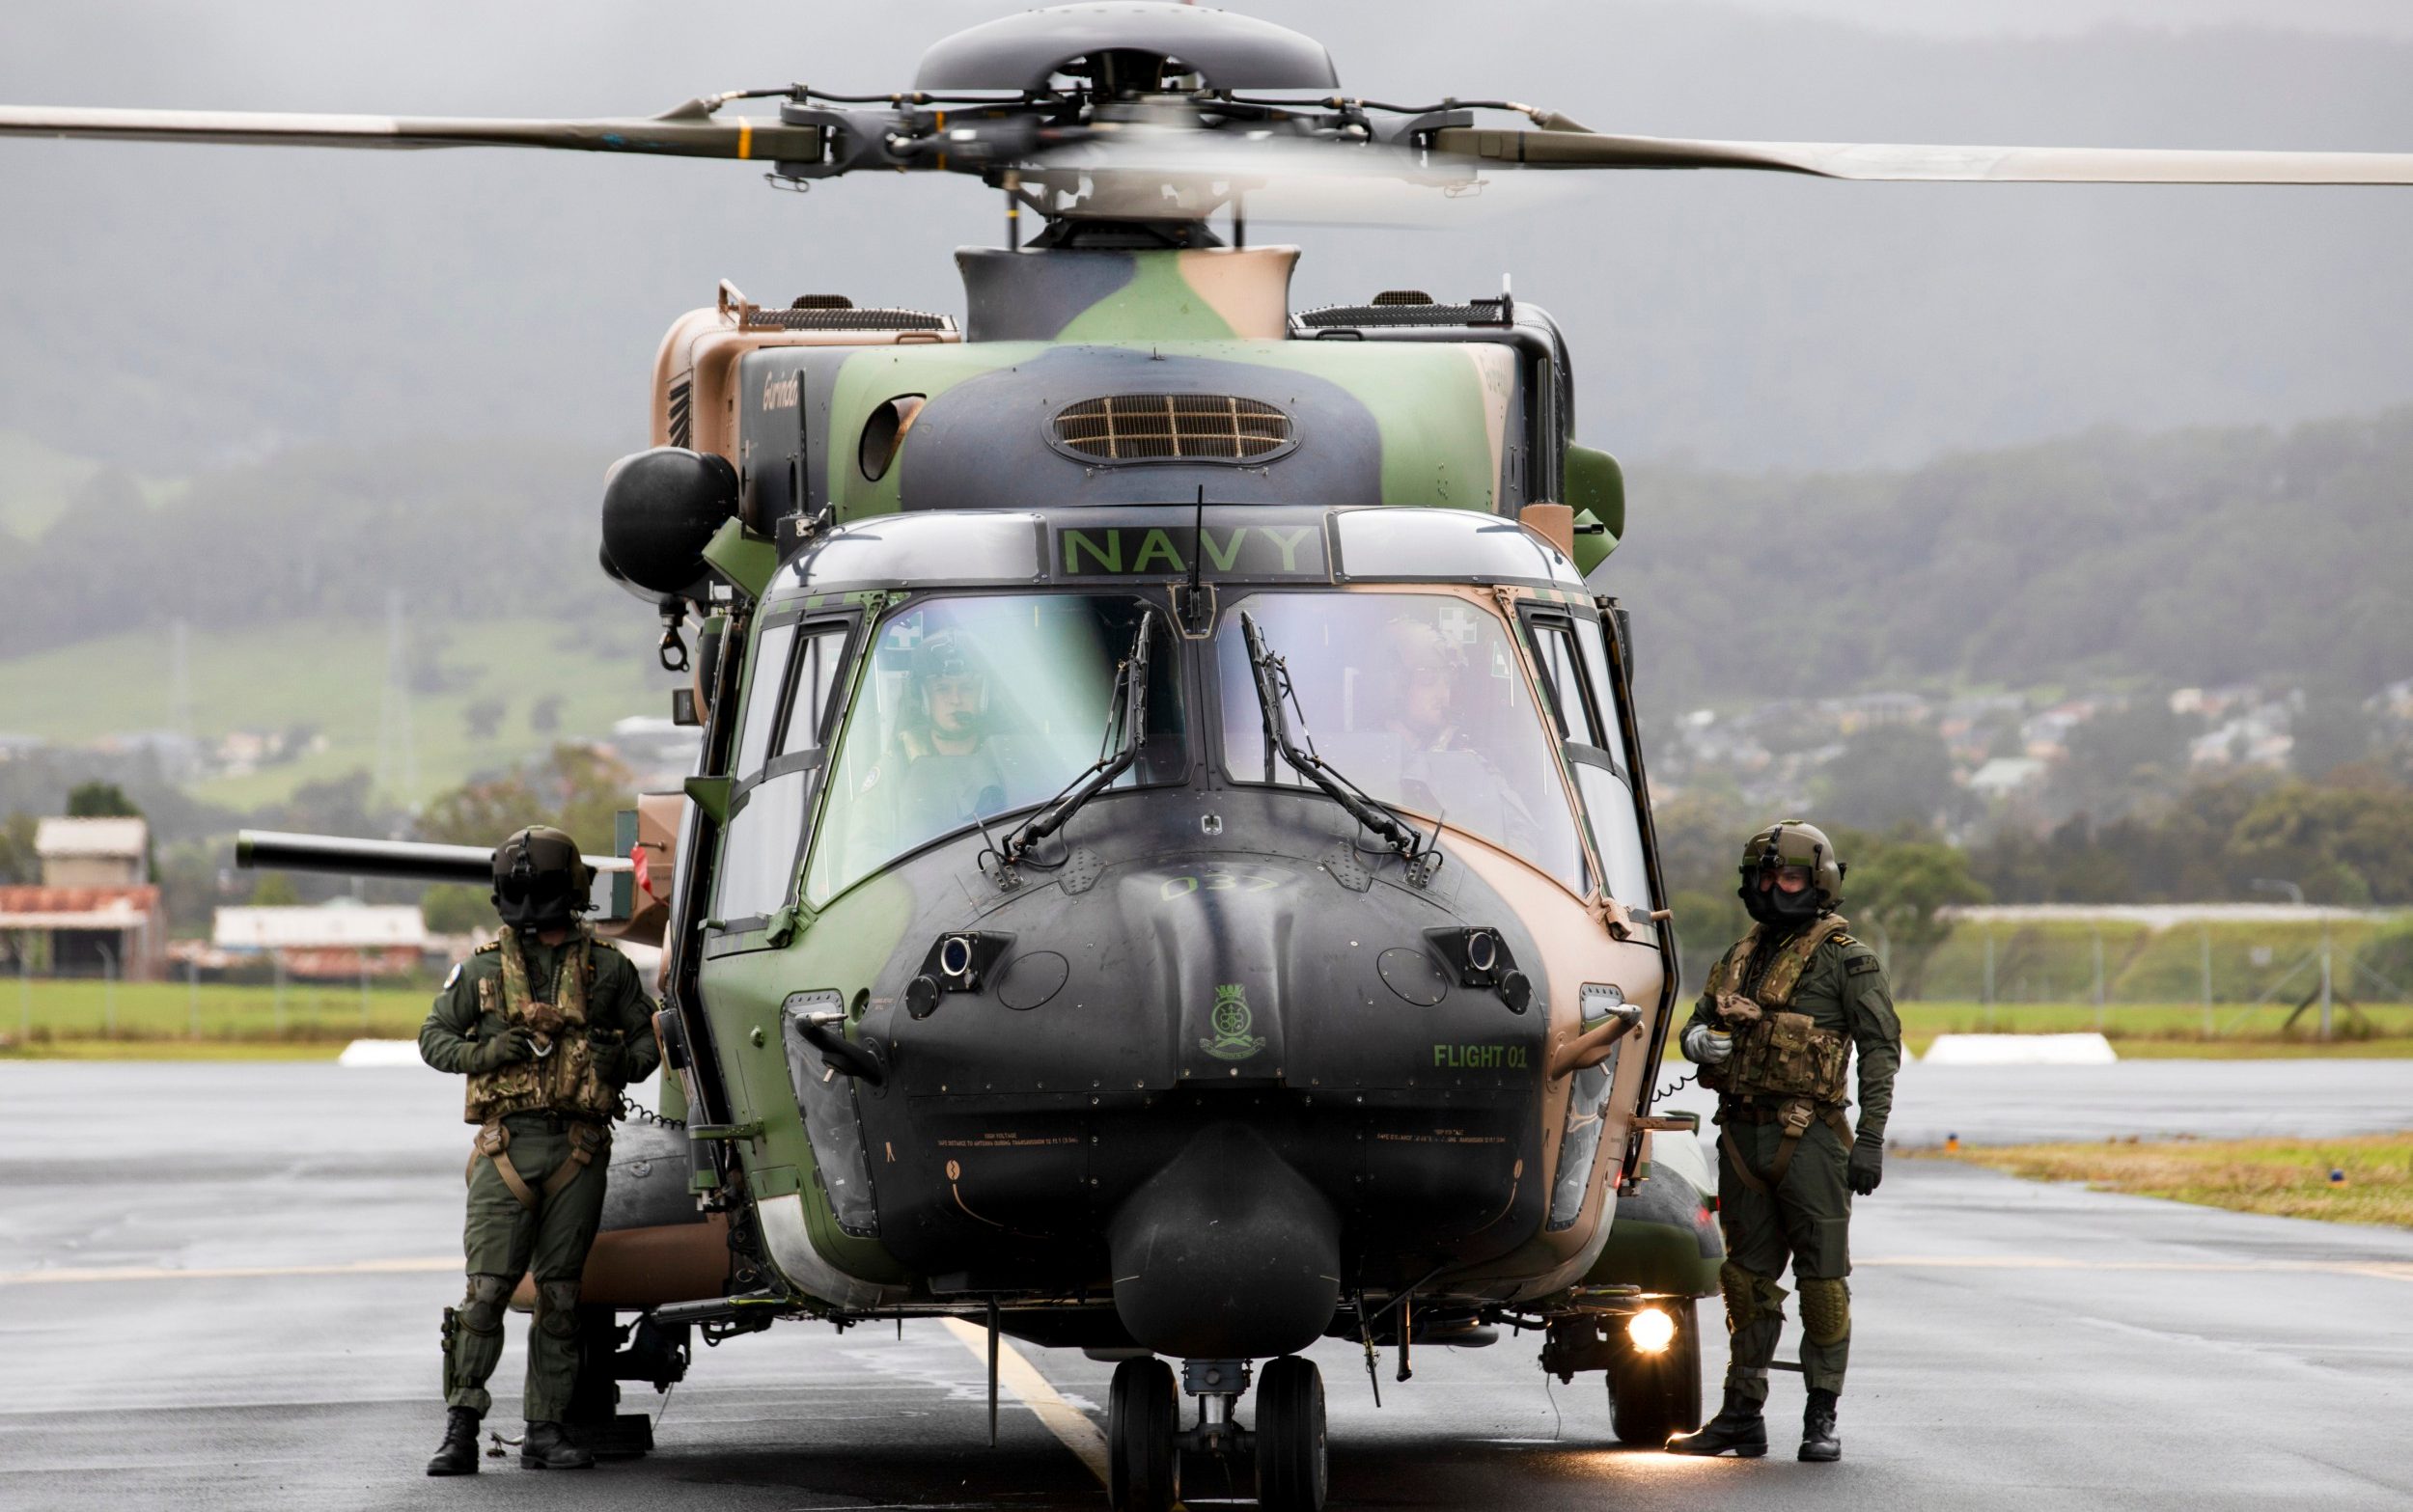 Royal Australian Navy aircrew from the 808 Squadron, stand beside their MRH90 Taipan helicopter in Wollongong, Australia